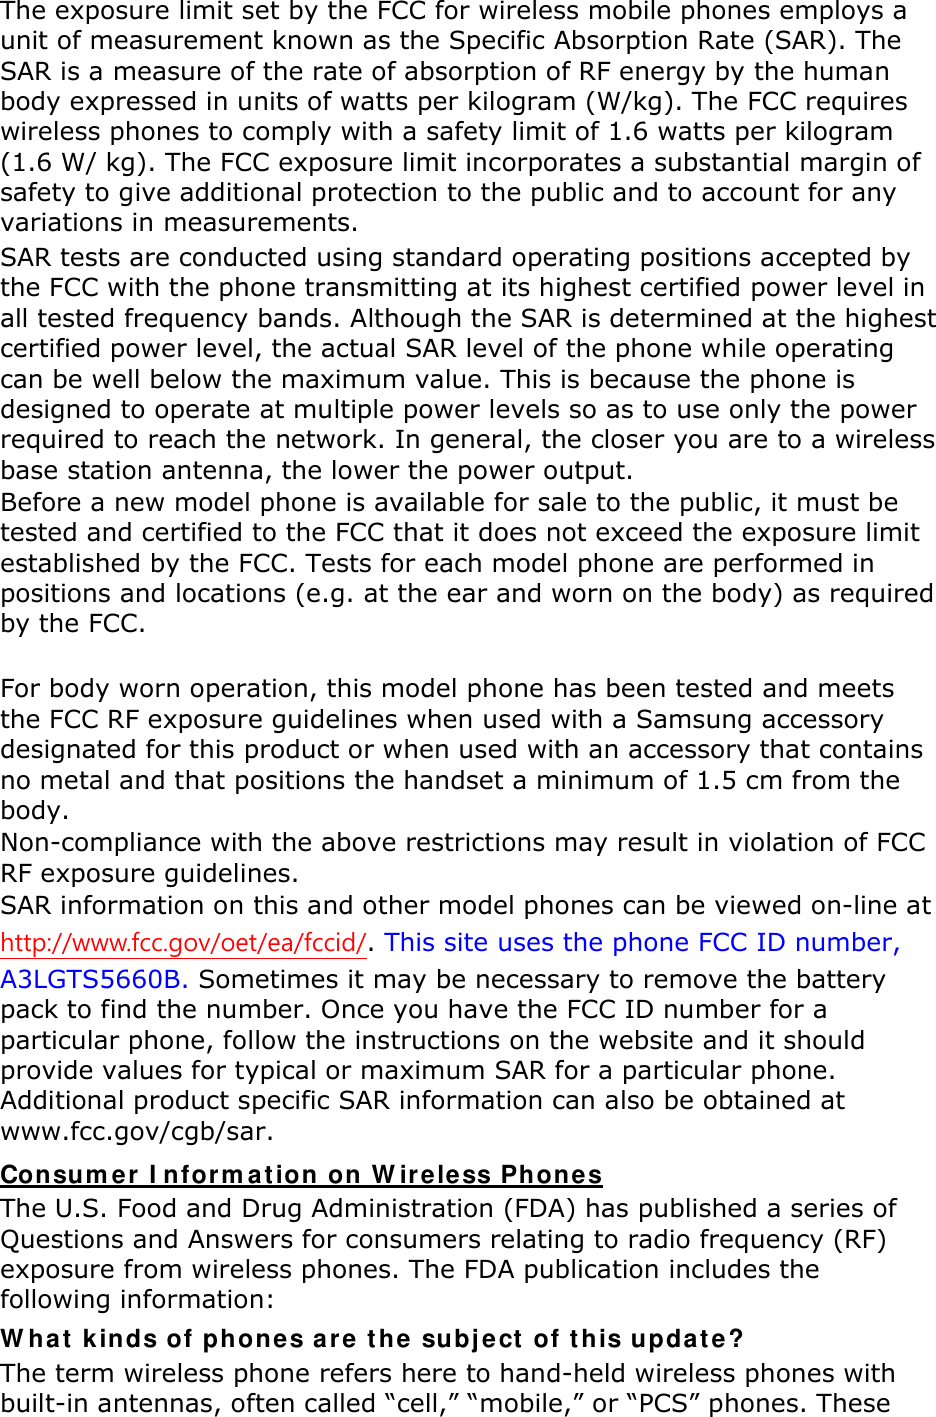 The exposure limit set by the FCC for wireless mobile phones employs a unit of measurement known as the Specific Absorption Rate (SAR). The SAR is a measure of the rate of absorption of RF energy by the human body expressed in units of watts per kilogram (W/kg). The FCC requires wireless phones to comply with a safety limit of 1.6 watts per kilogram (1.6 W/ kg). The FCC exposure limit incorporates a substantial margin of safety to give additional protection to the public and to account for any variations in measurements. SAR tests are conducted using standard operating positions accepted by the FCC with the phone transmitting at its highest certified power level in all tested frequency bands. Although the SAR is determined at the highest certified power level, the actual SAR level of the phone while operating can be well below the maximum value. This is because the phone is designed to operate at multiple power levels so as to use only the power required to reach the network. In general, the closer you are to a wireless base station antenna, the lower the power output. Before a new model phone is available for sale to the public, it must be tested and certified to the FCC that it does not exceed the exposure limit established by the FCC. Tests for each model phone are performed in positions and locations (e.g. at the ear and worn on the body) as required by the FCC.      For body worn operation, this model phone has been tested and meets the FCC RF exposure guidelines when used with a Samsung accessory designated for this product or when used with an accessory that contains no metal and that positions the handset a minimum of 1.5 cm from the body.   Non-compliance with the above restrictions may result in violation of FCC RF exposure guidelines. SAR information on this and other model phones can be viewed on-line at http://www.fcc.gov/oet/ea/fccid/. This site uses the phone FCC ID number, A3LGTS5660B. Sometimes it may be necessary to remove the battery pack to find the number. Once you have the FCC ID number for a particular phone, follow the instructions on the website and it should provide values for typical or maximum SAR for a particular phone. Additional product specific SAR information can also be obtained at www.fcc.gov/cgb/sar. Consumer Information on Wireless Phones The U.S. Food and Drug Administration (FDA) has published a series of Questions and Answers for consumers relating to radio frequency (RF) exposure from wireless phones. The FDA publication includes the following information: What kinds of phones are the subject of this update? The term wireless phone refers here to hand-held wireless phones with built-in antennas, often called “cell,” “mobile,” or “PCS” phones. These 